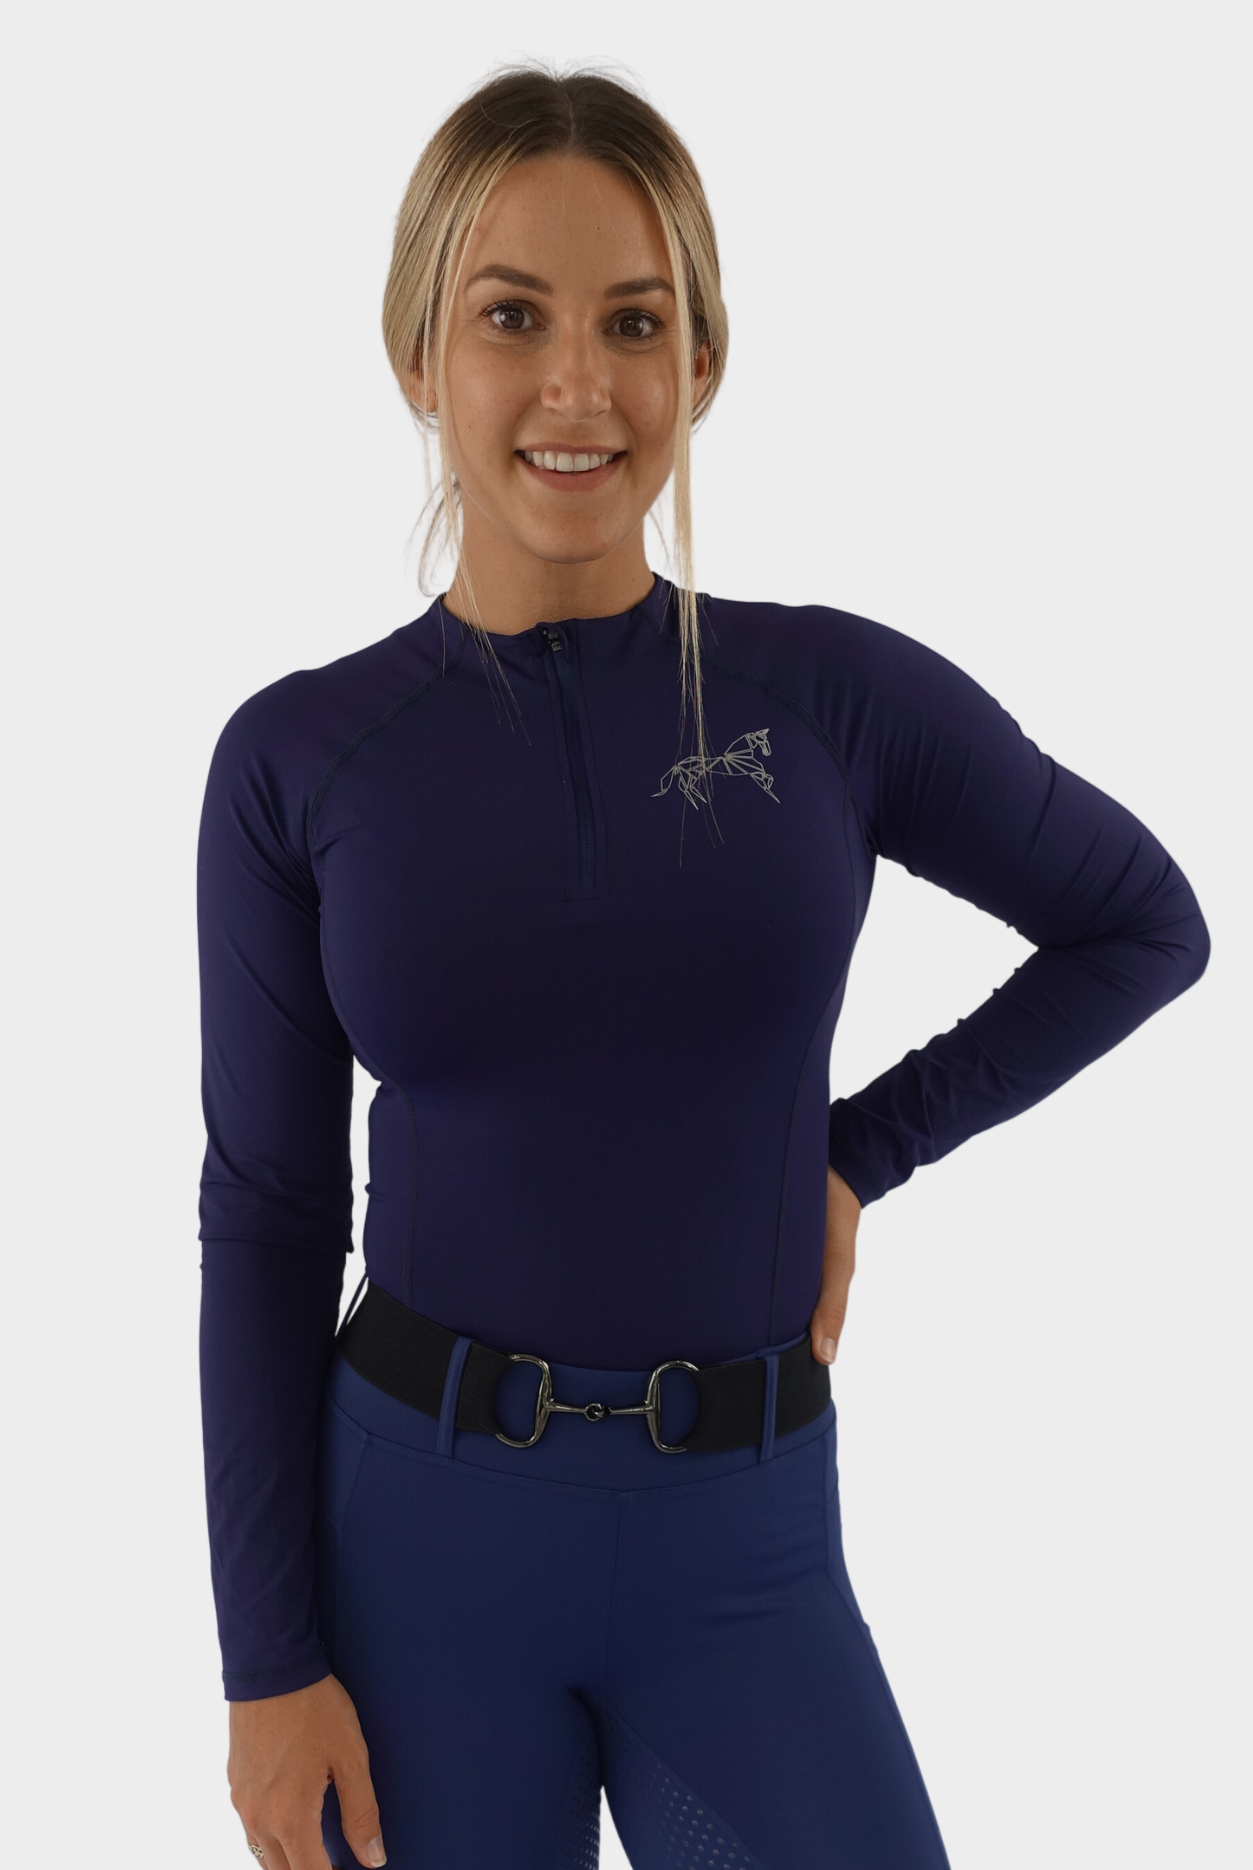 A woman with blonde hair is smiling at the camera. She is wearing a long-sleeve, navy athletic top with a partial zipper and a Pure Canter logo on the chest, along with matching purple athletic pants. Her premium base layers feature quick drying technology. Her right hand is on her hip.